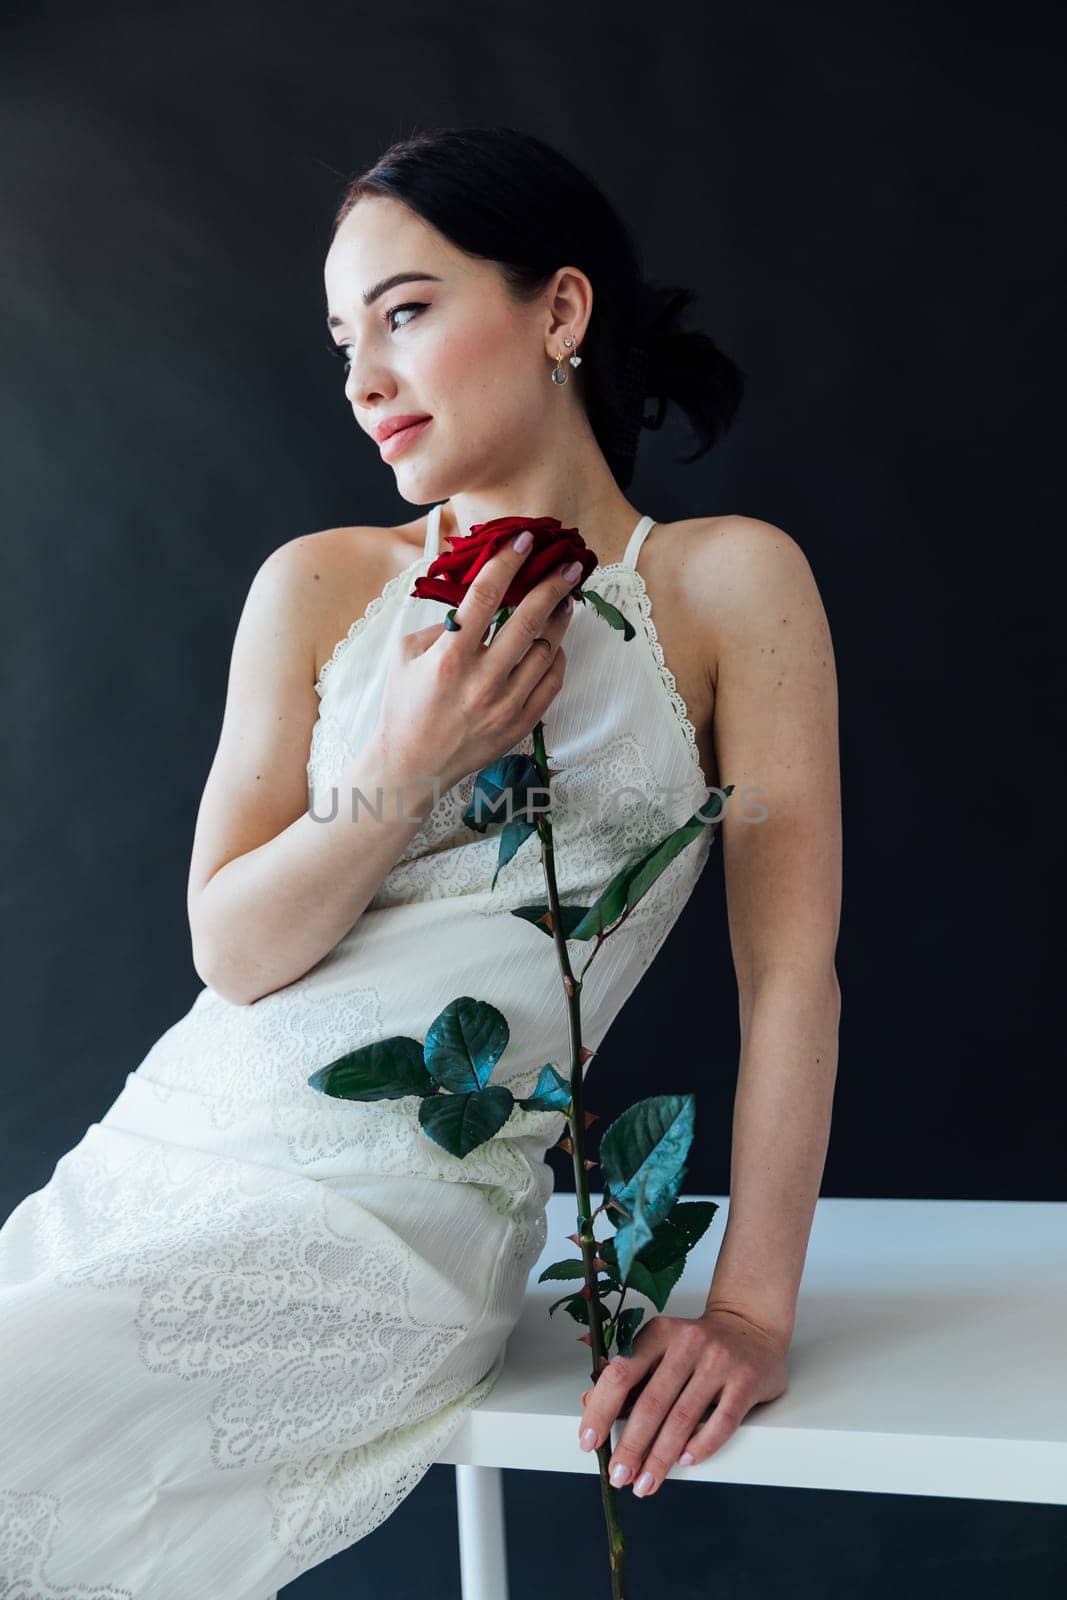 beautiful woman in a white dress sits with a red rose on a dark background